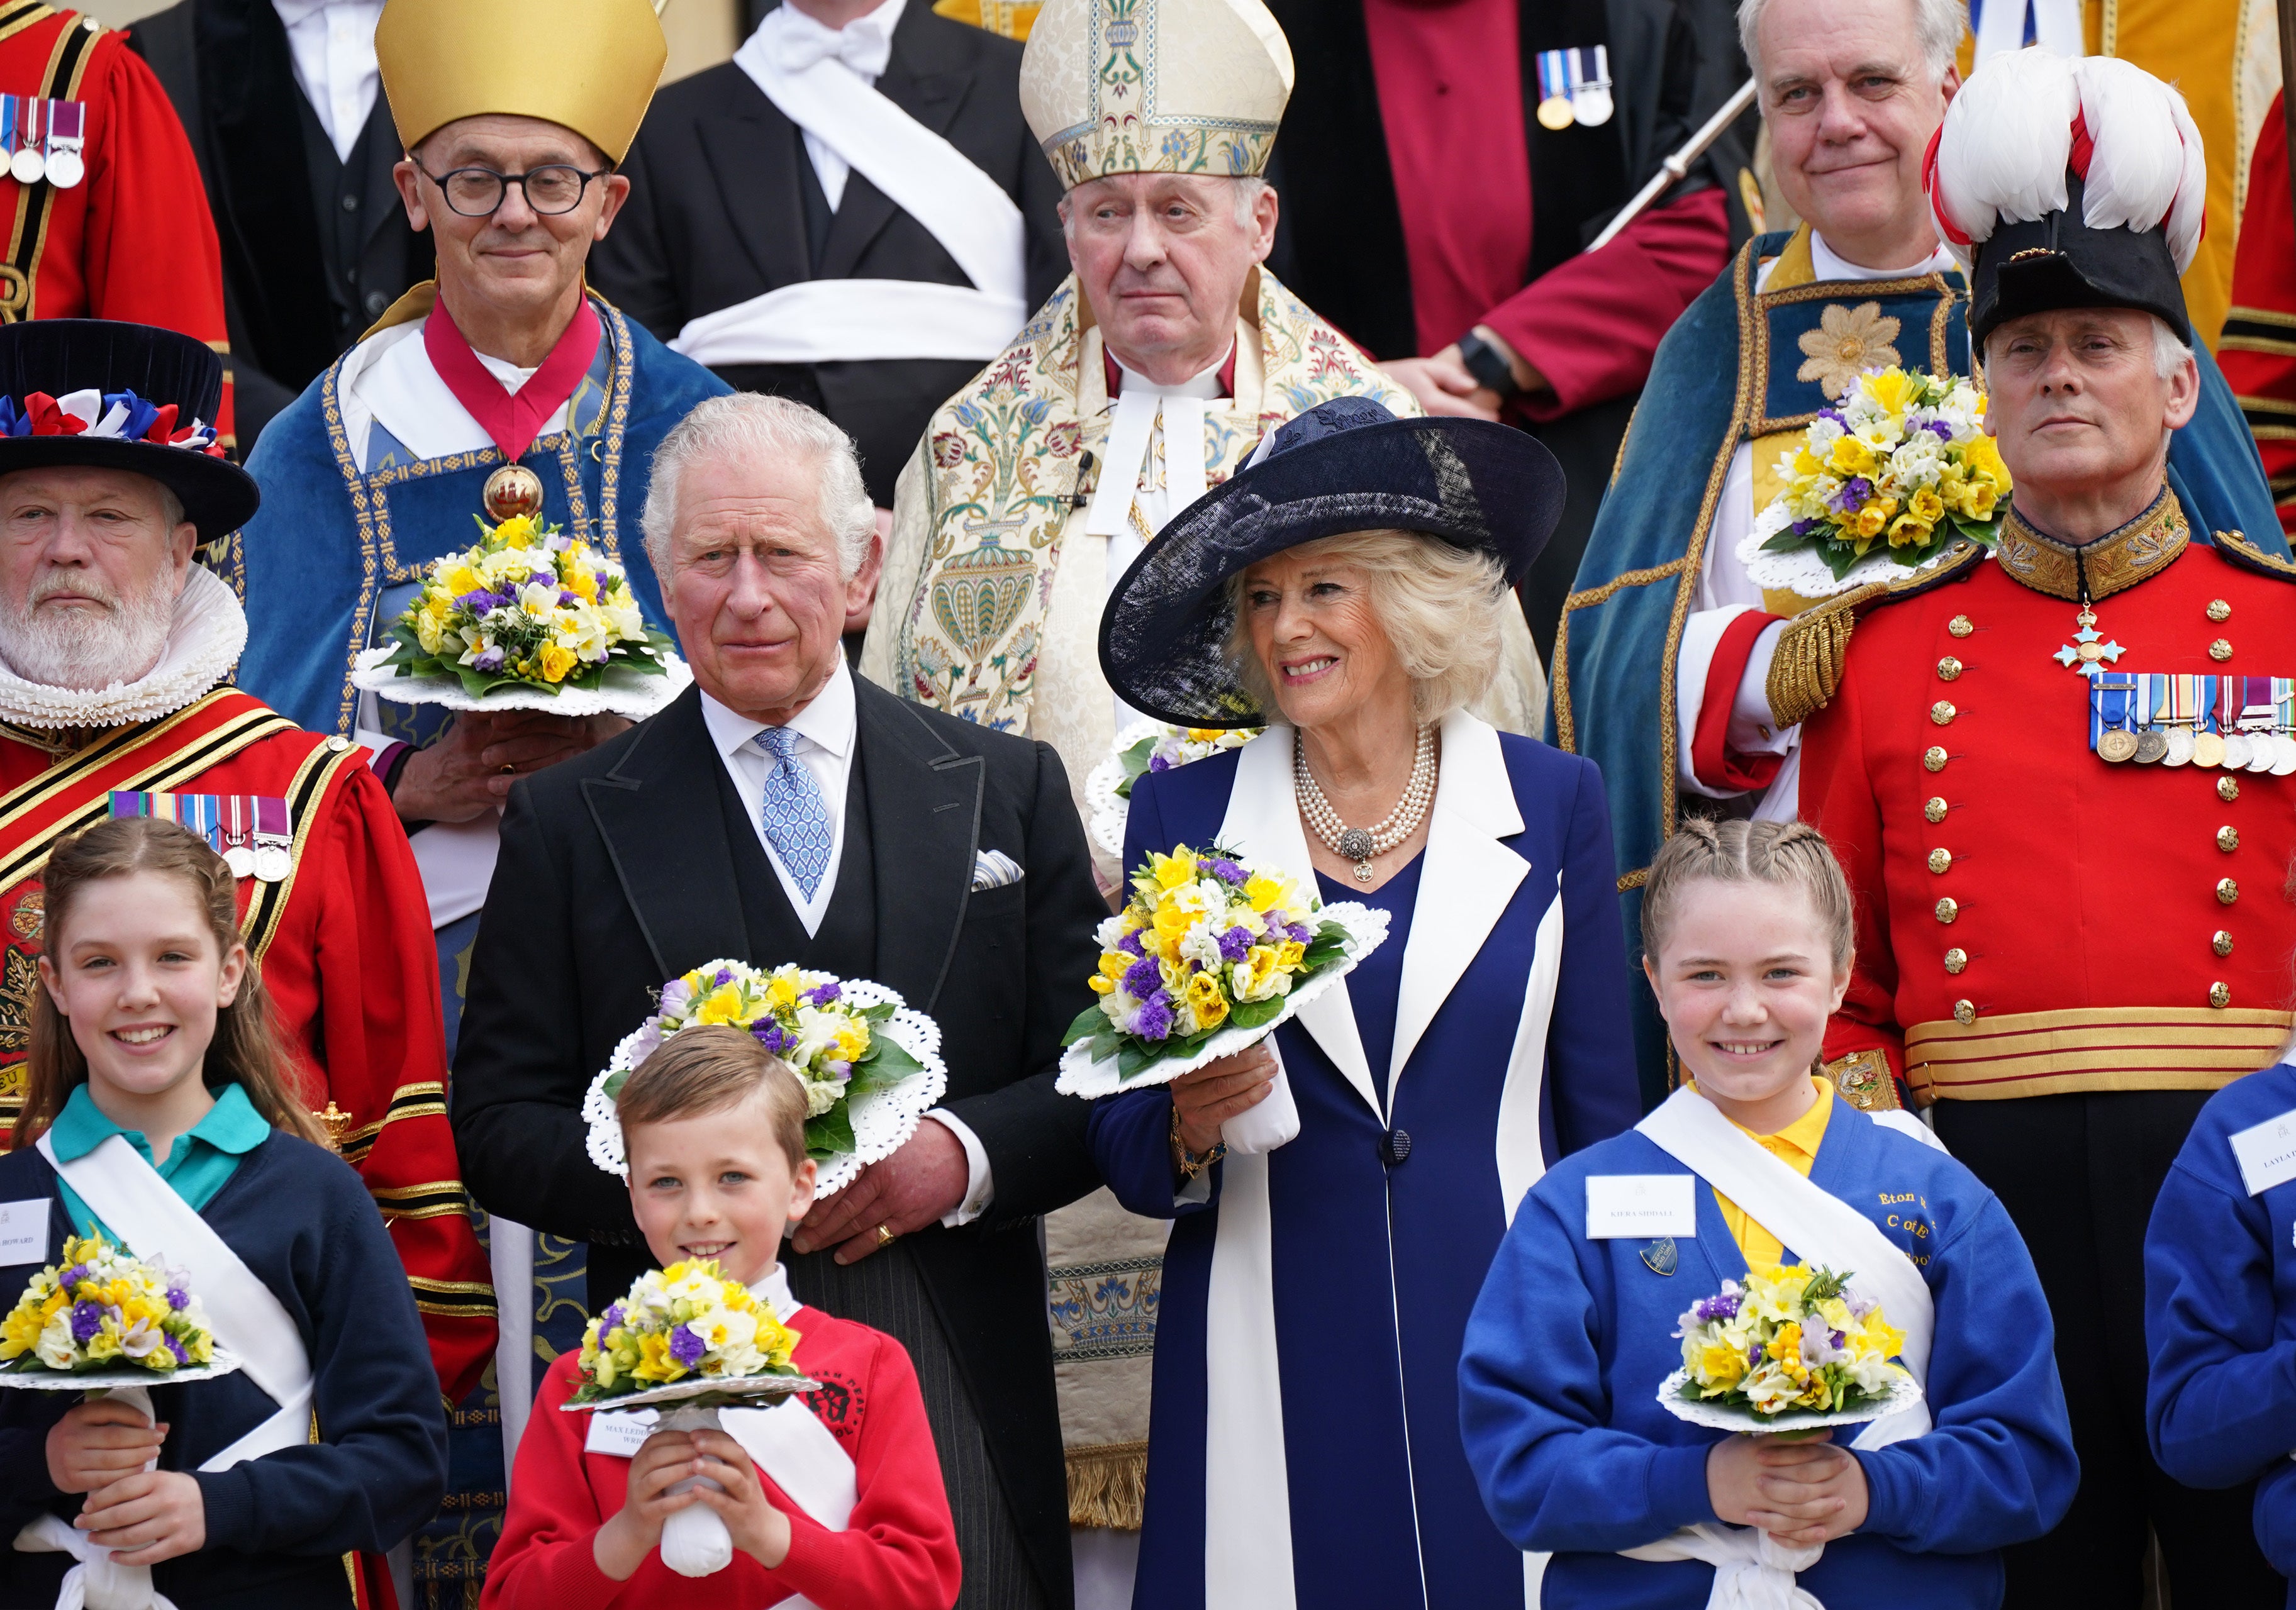 The Prince of Wales, representing the Queen, and the Duchess of Cornwall pose for a photograph with members of the Queen’s Body Guard of the Yeomen of the Guard, following the Royal Maundy Service at St George’s Chapel, Windsor. Picture date: Thursday April 14, 2022.